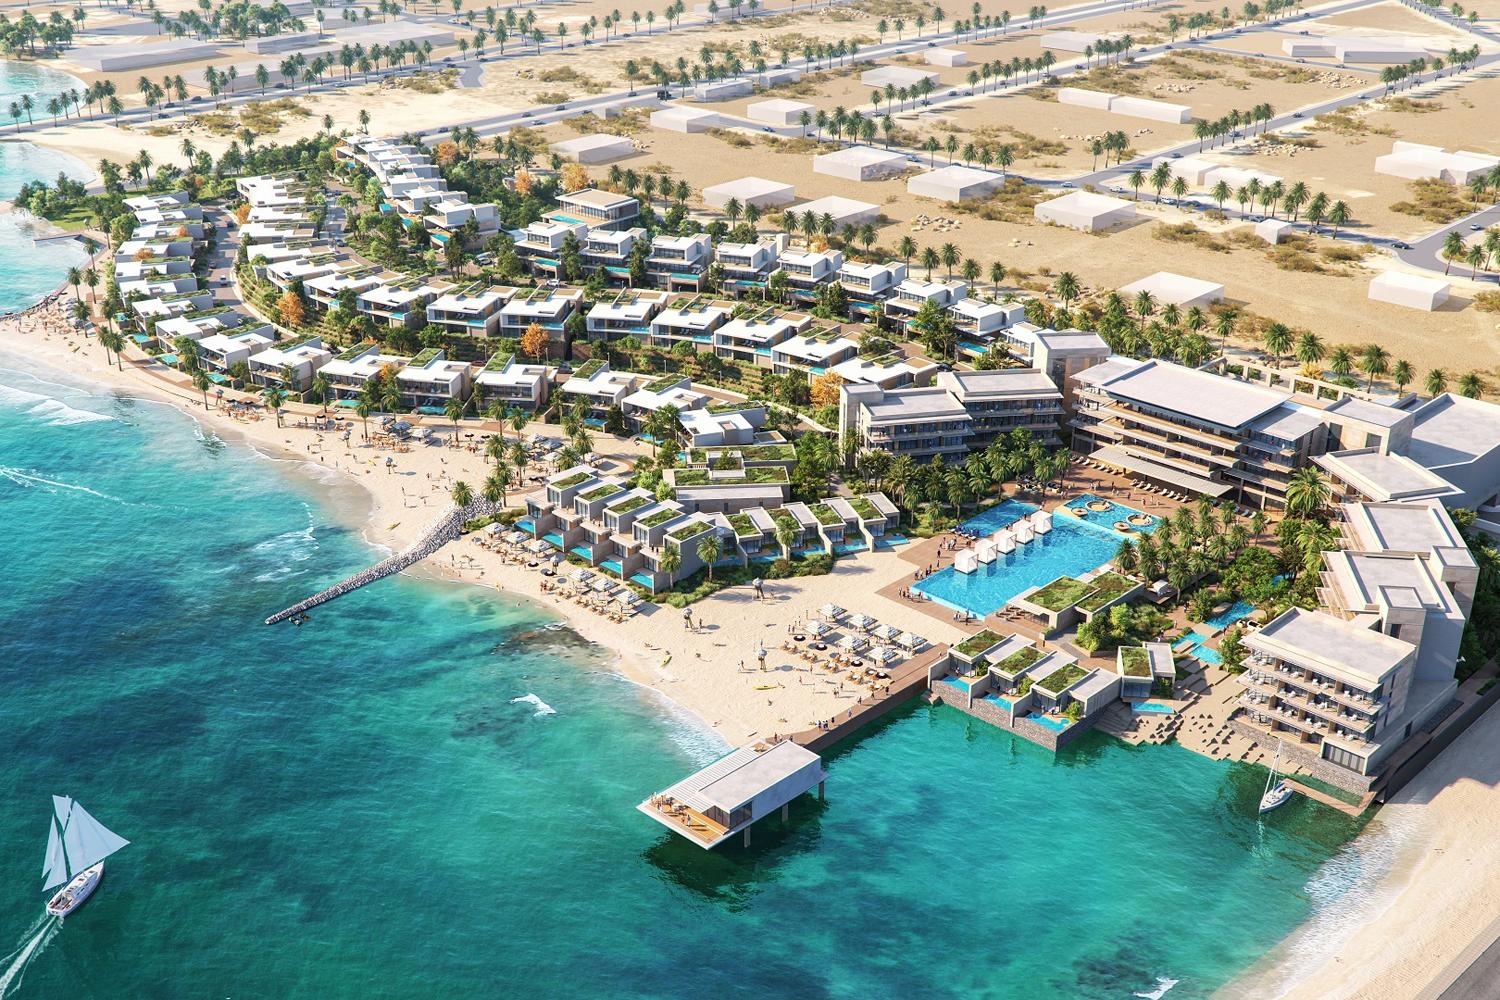 The Ritz-Carlton Al Khobar: Check out the first luxury beach resort in the city 